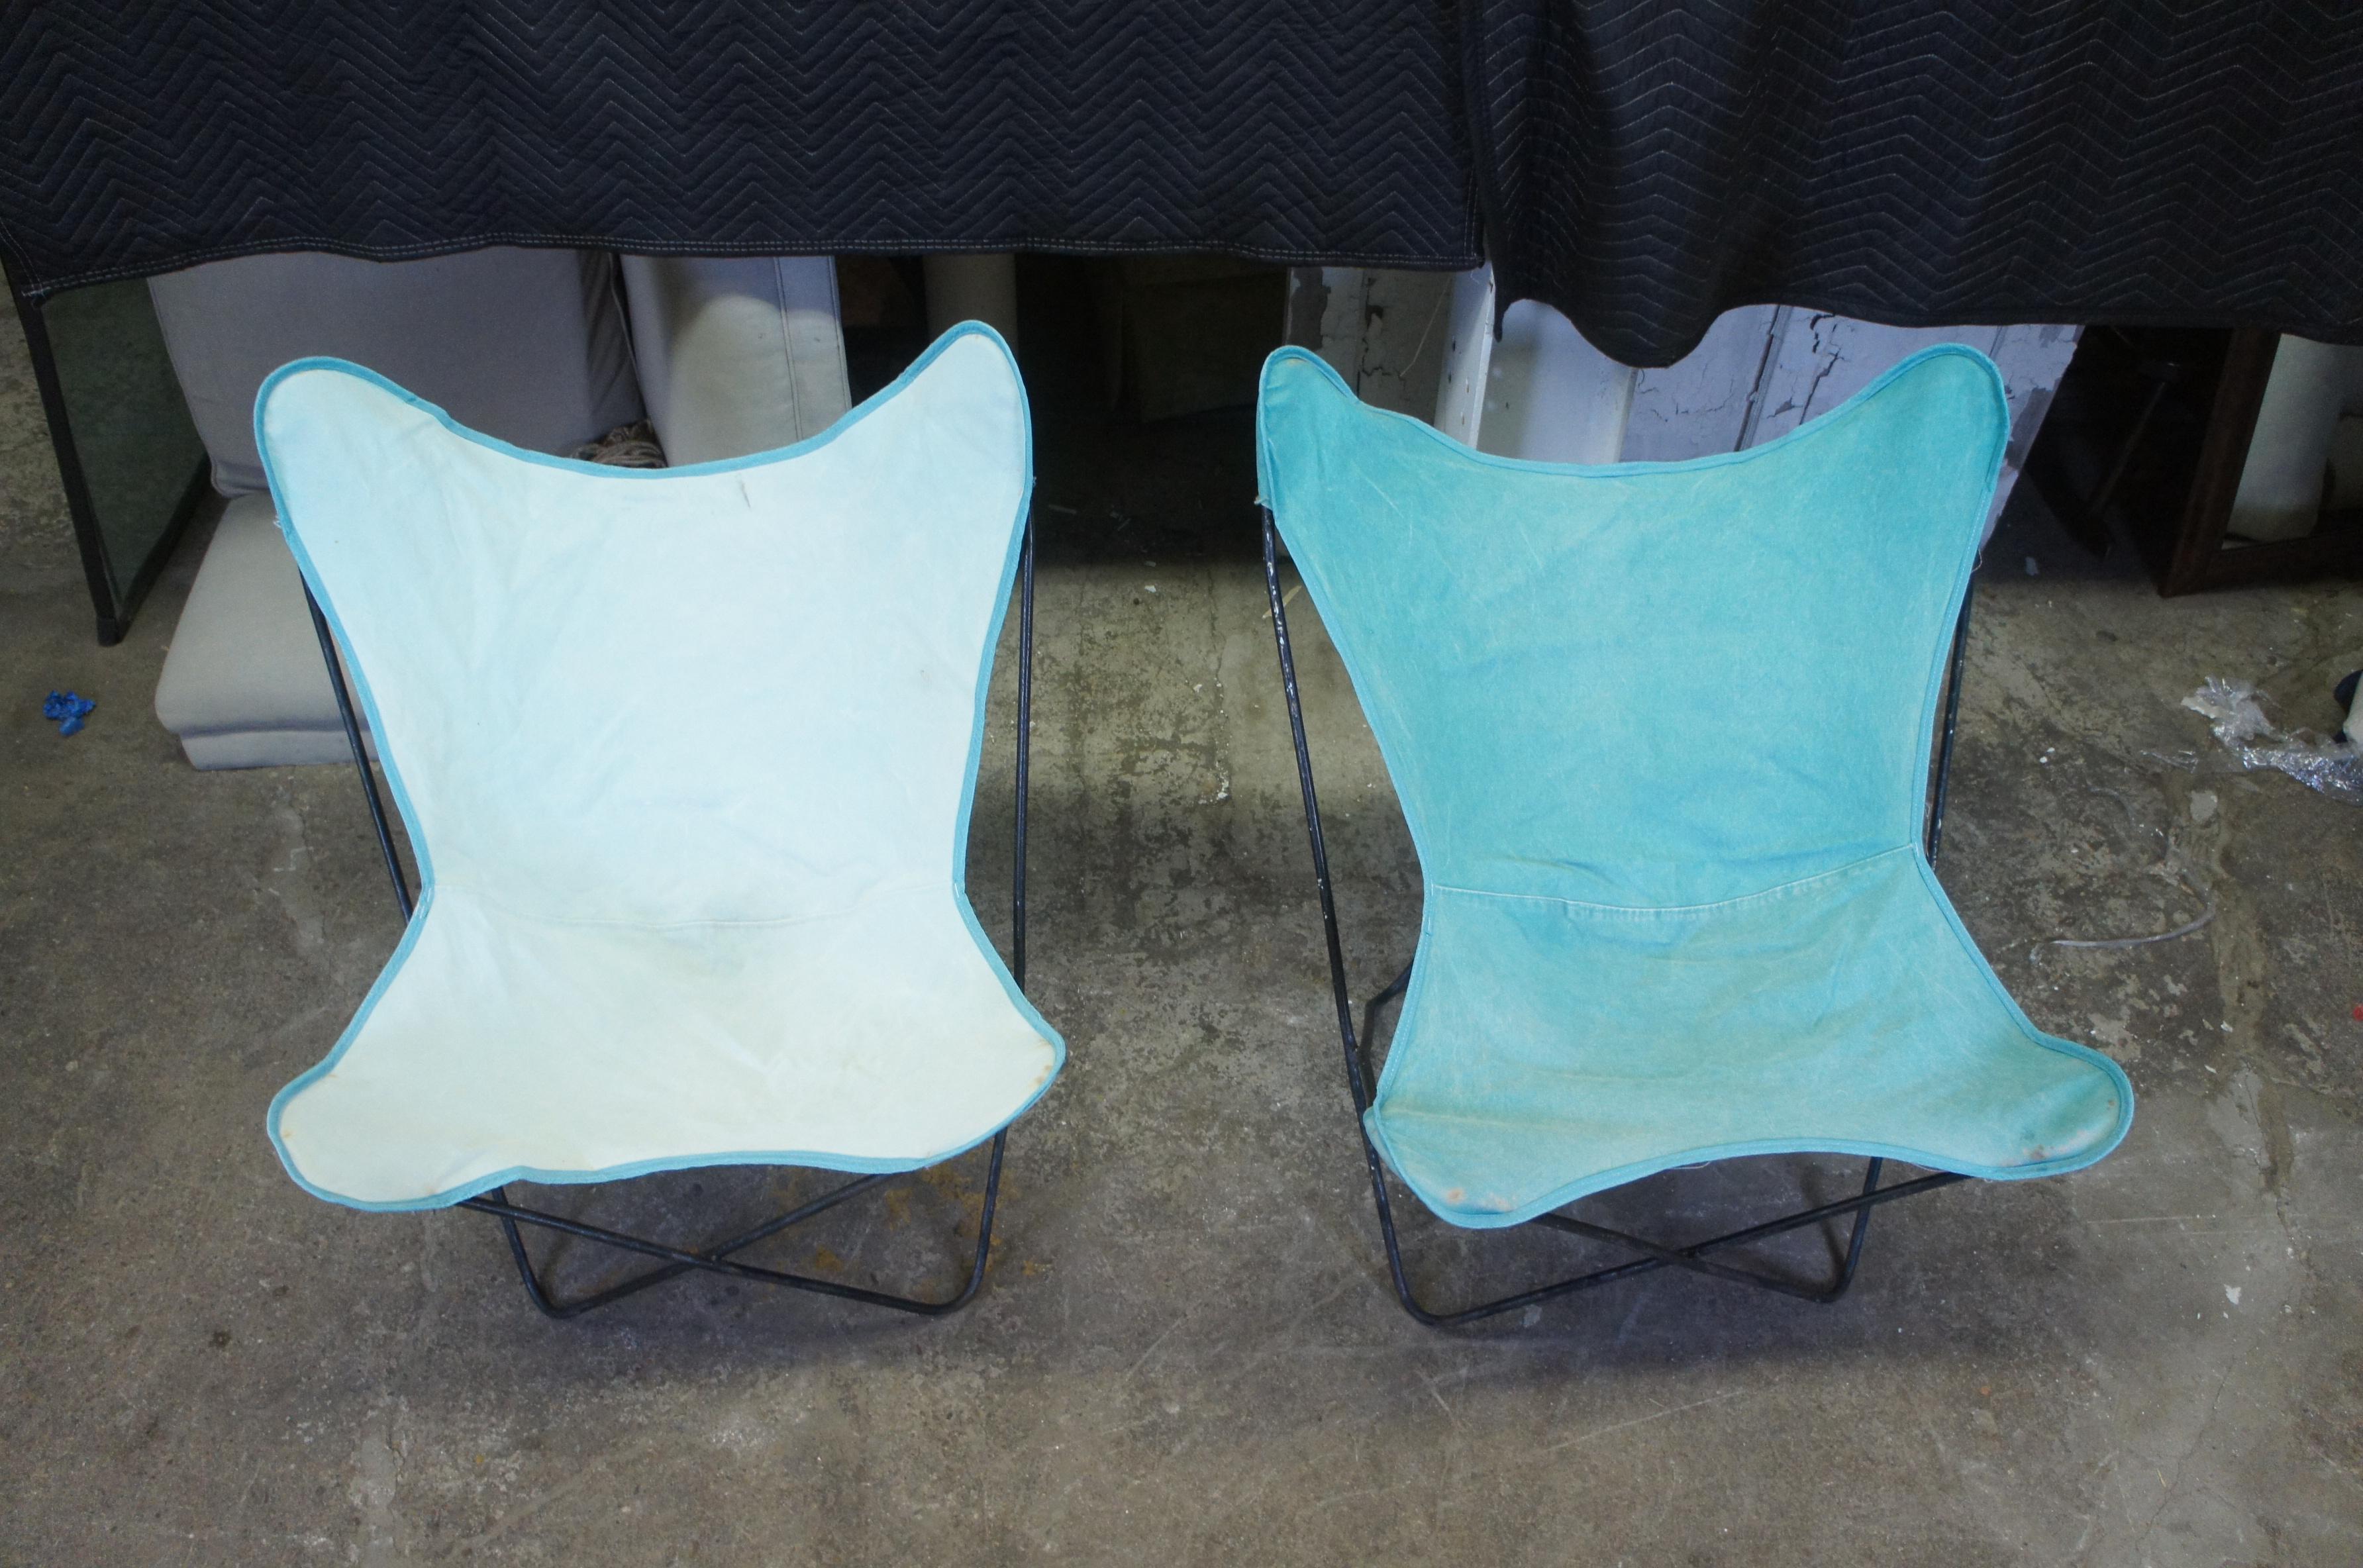 blue butterfly chair